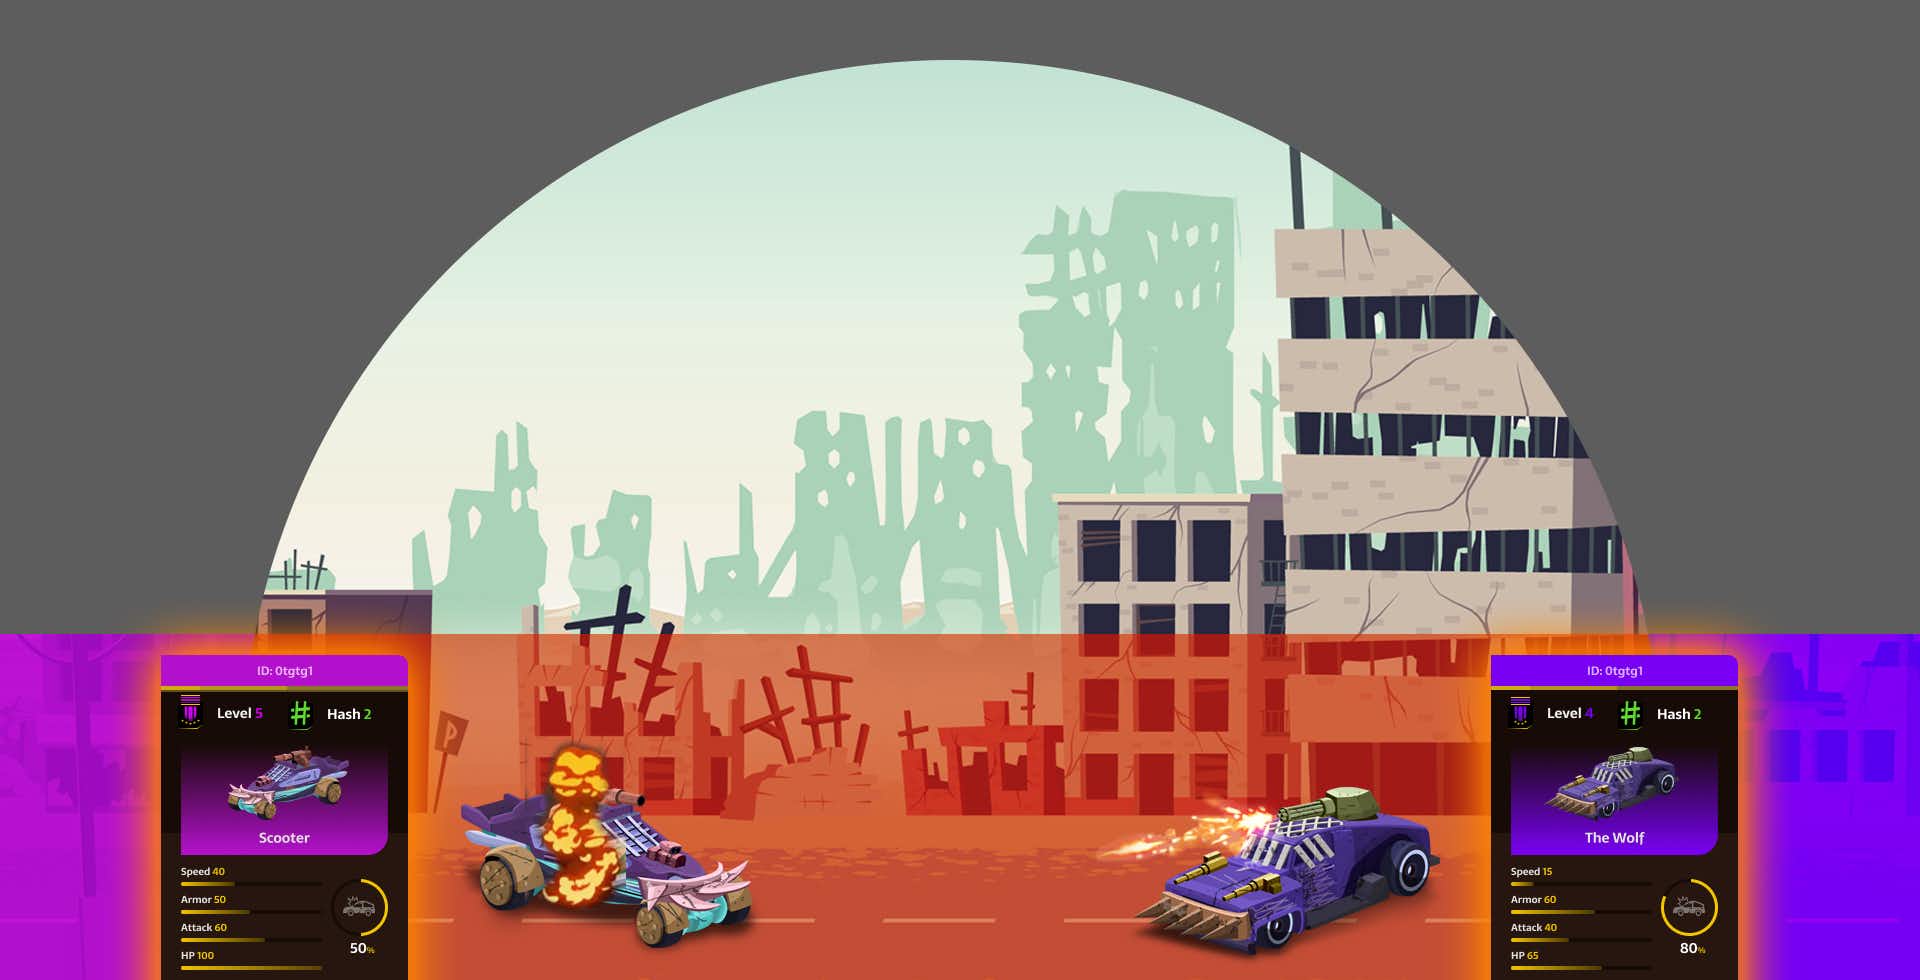 game image from Rage on Wheels